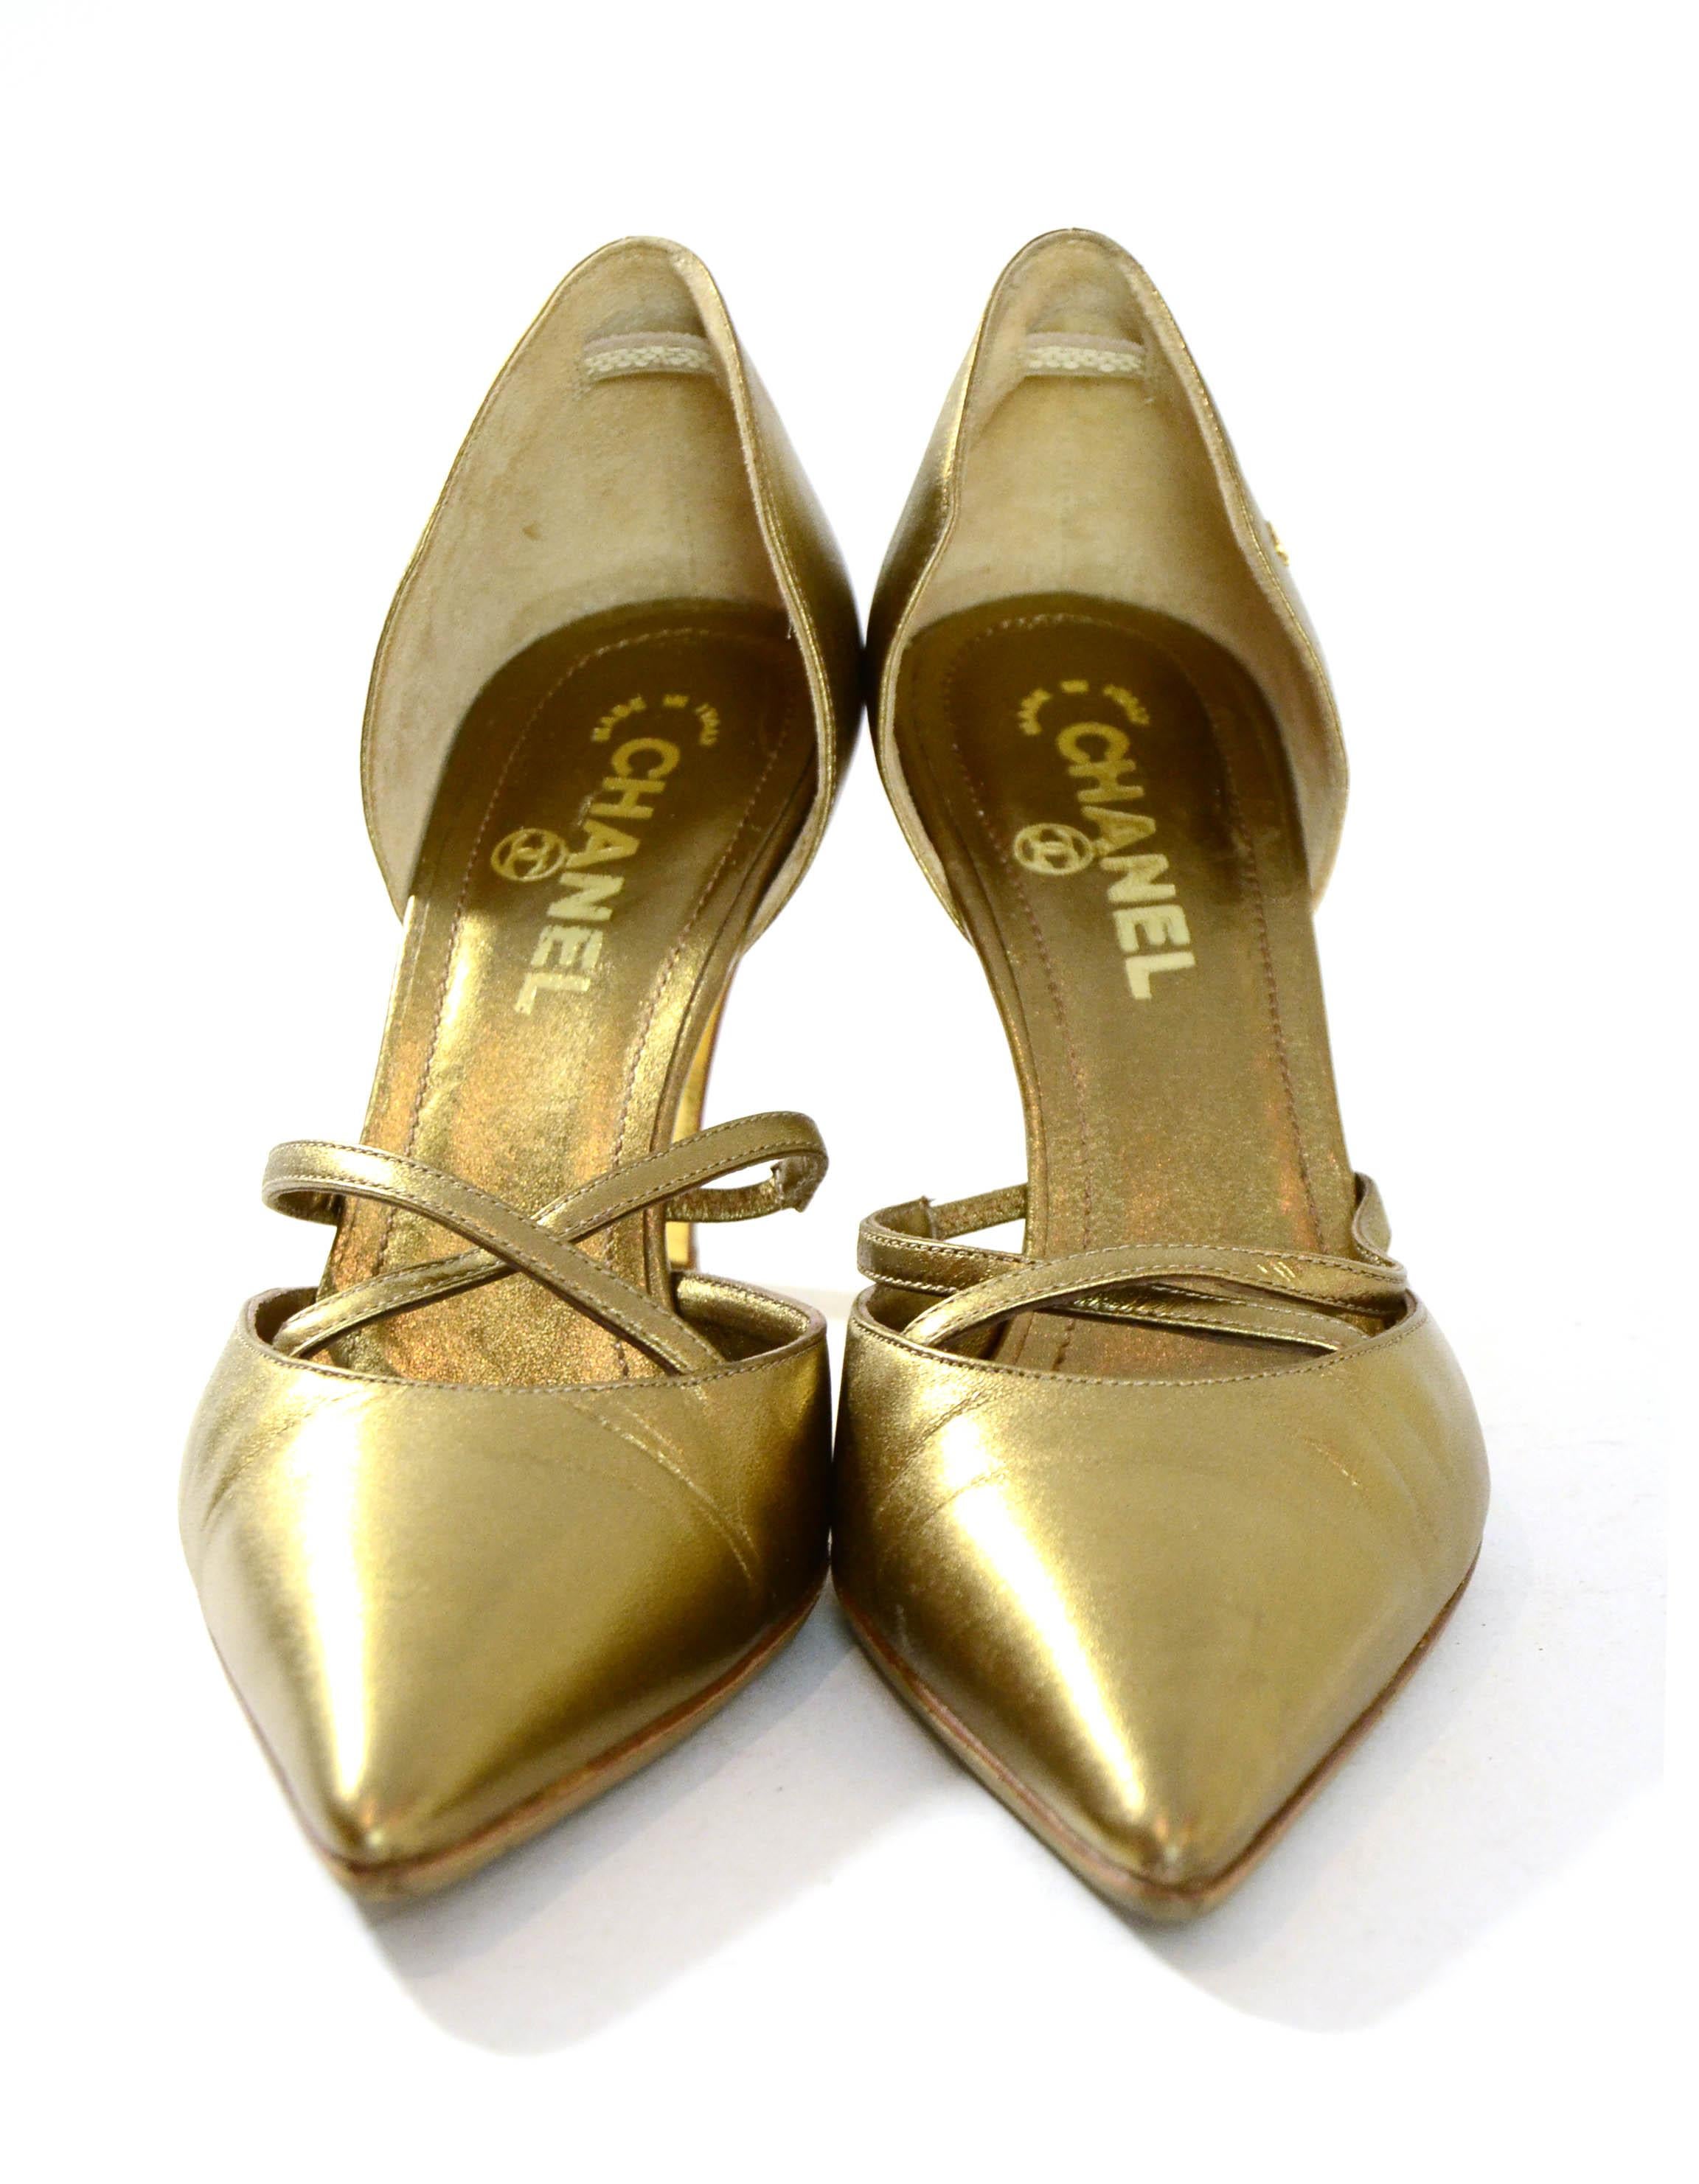 Chanel Gold Leather Pointy Toe Pumps

Made In: Italy
Color: Gold
Materials: Leather
Closure/Opening: Slip on
Overall Condition: Very - slight scuffing throughout

Marked Size: 37.5 
Heel Height: 3.5”